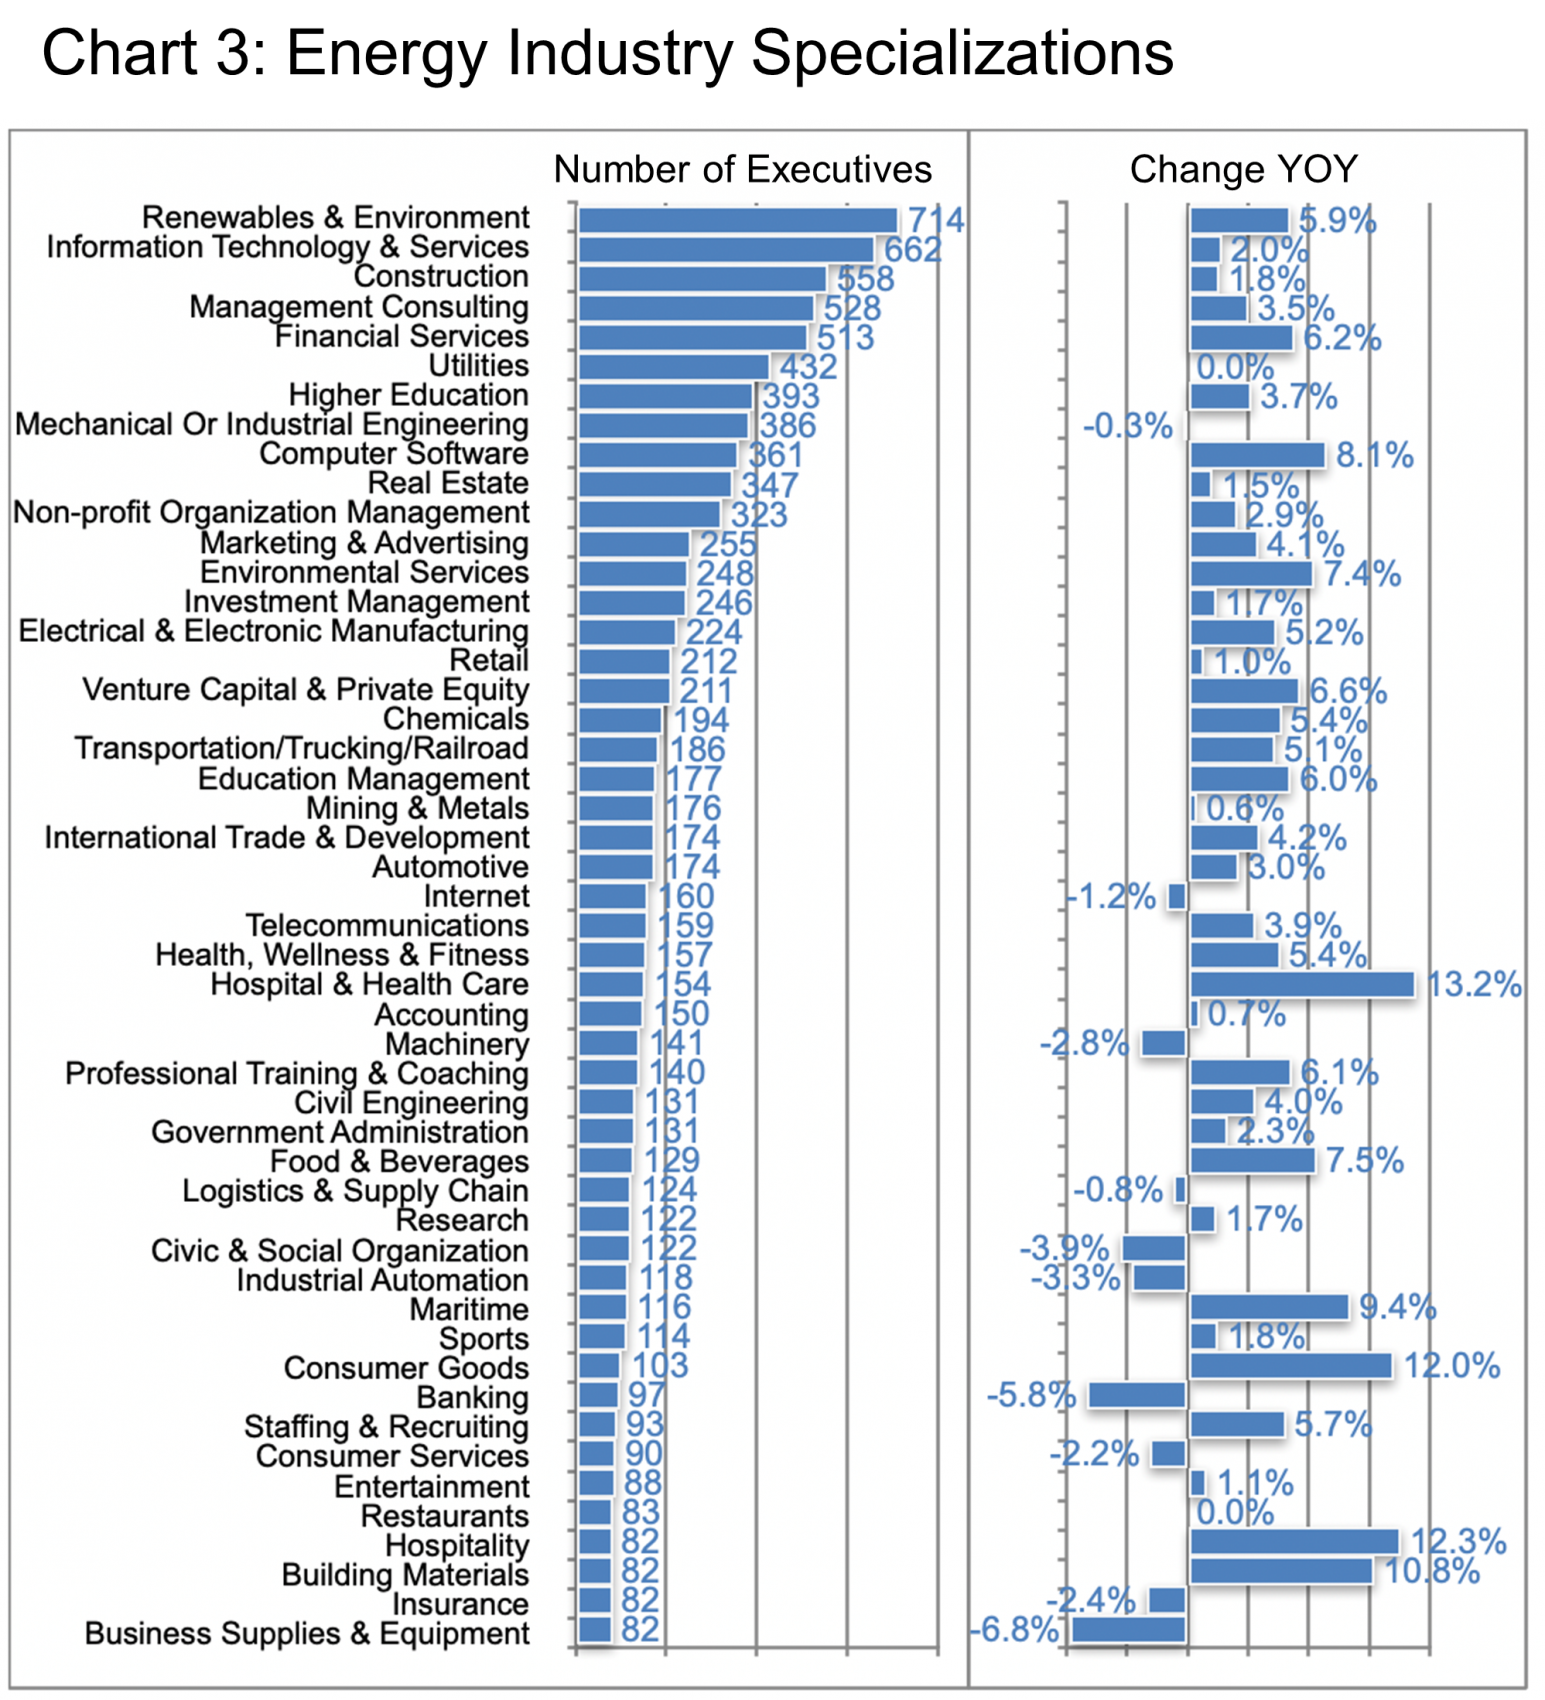 Energy Industry Specializations-Chart 3